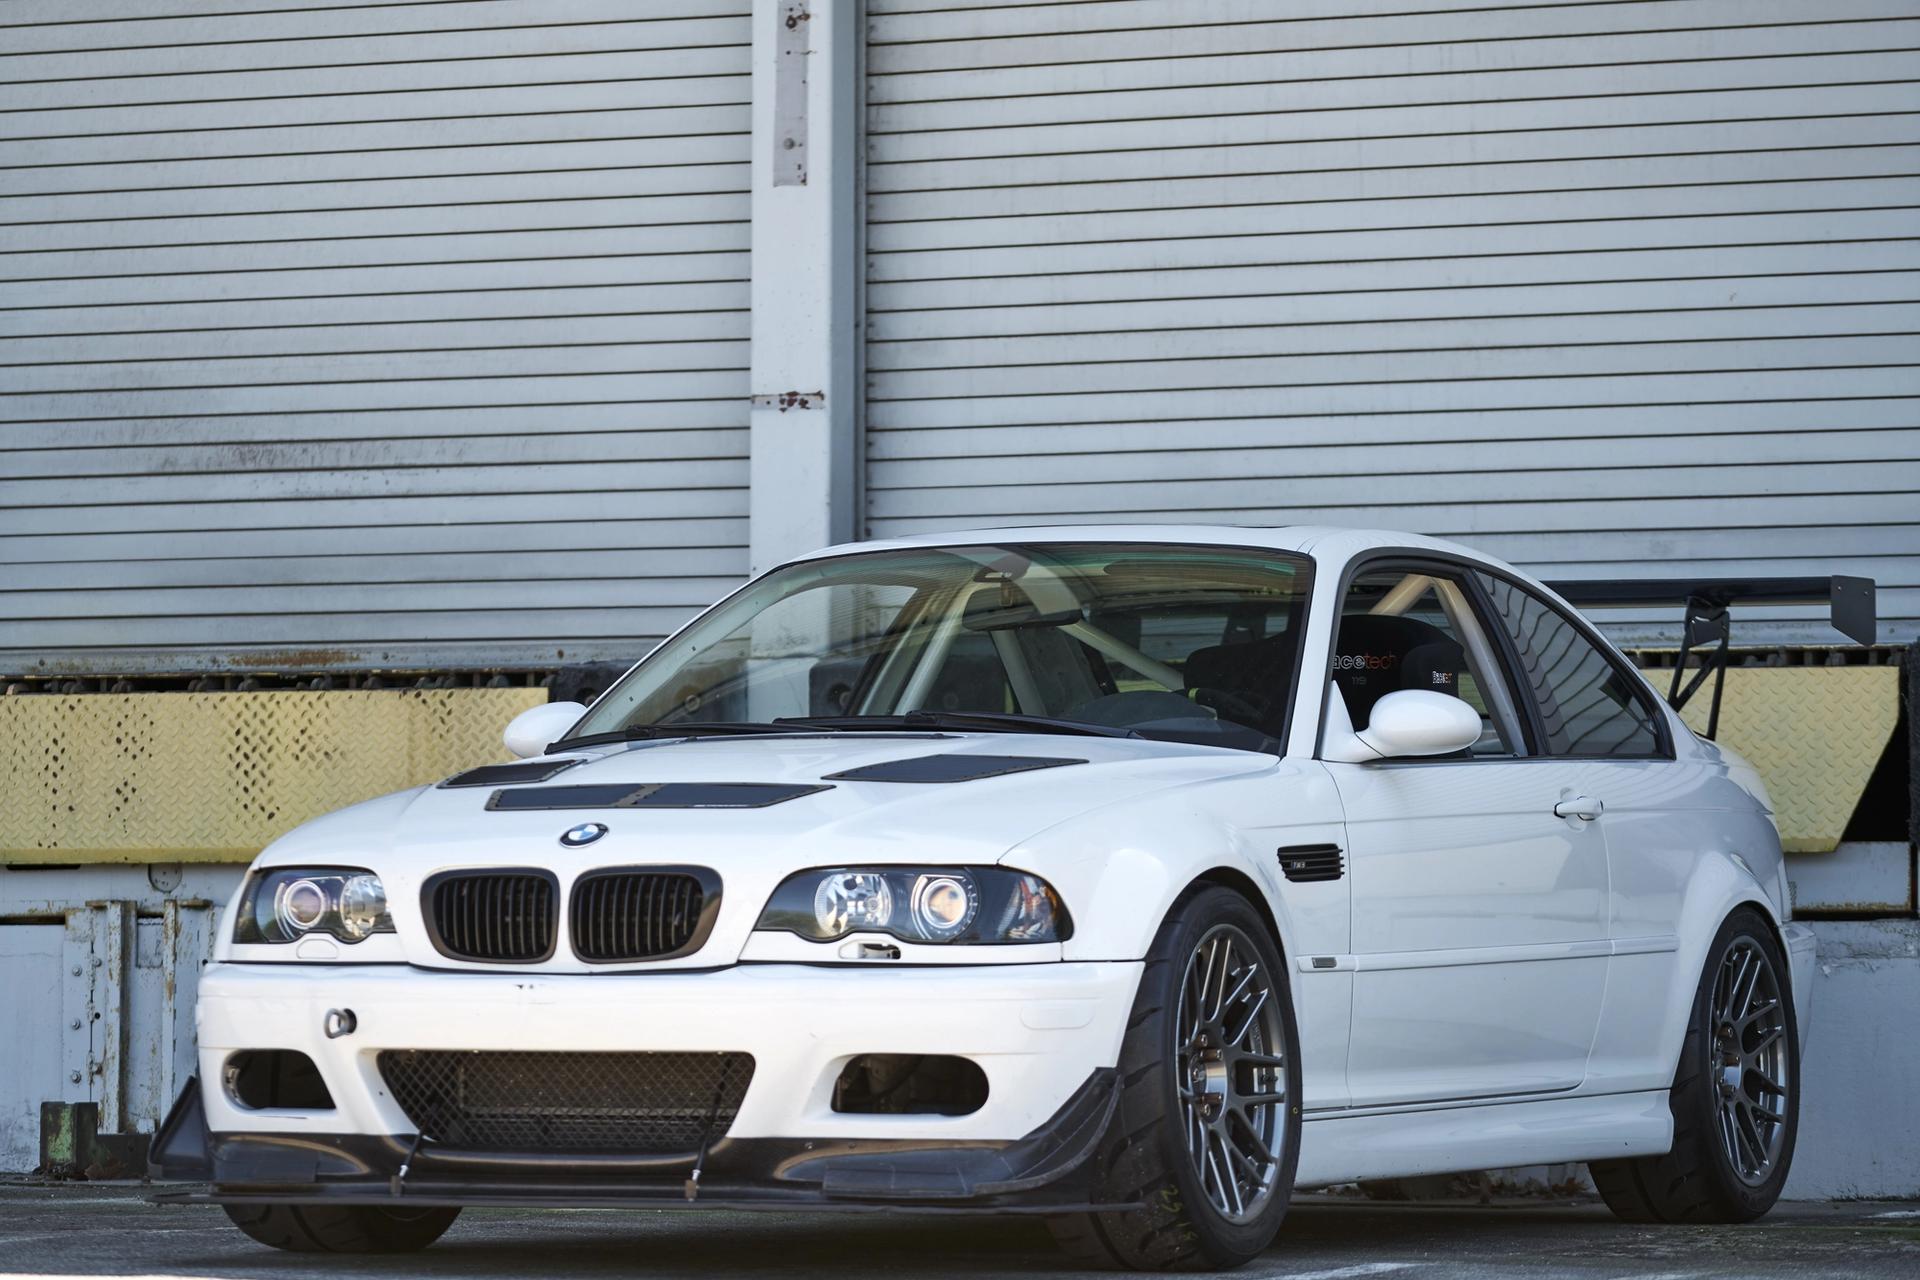 BMW E46 M3 with 18" ARC-8R in Anthracite